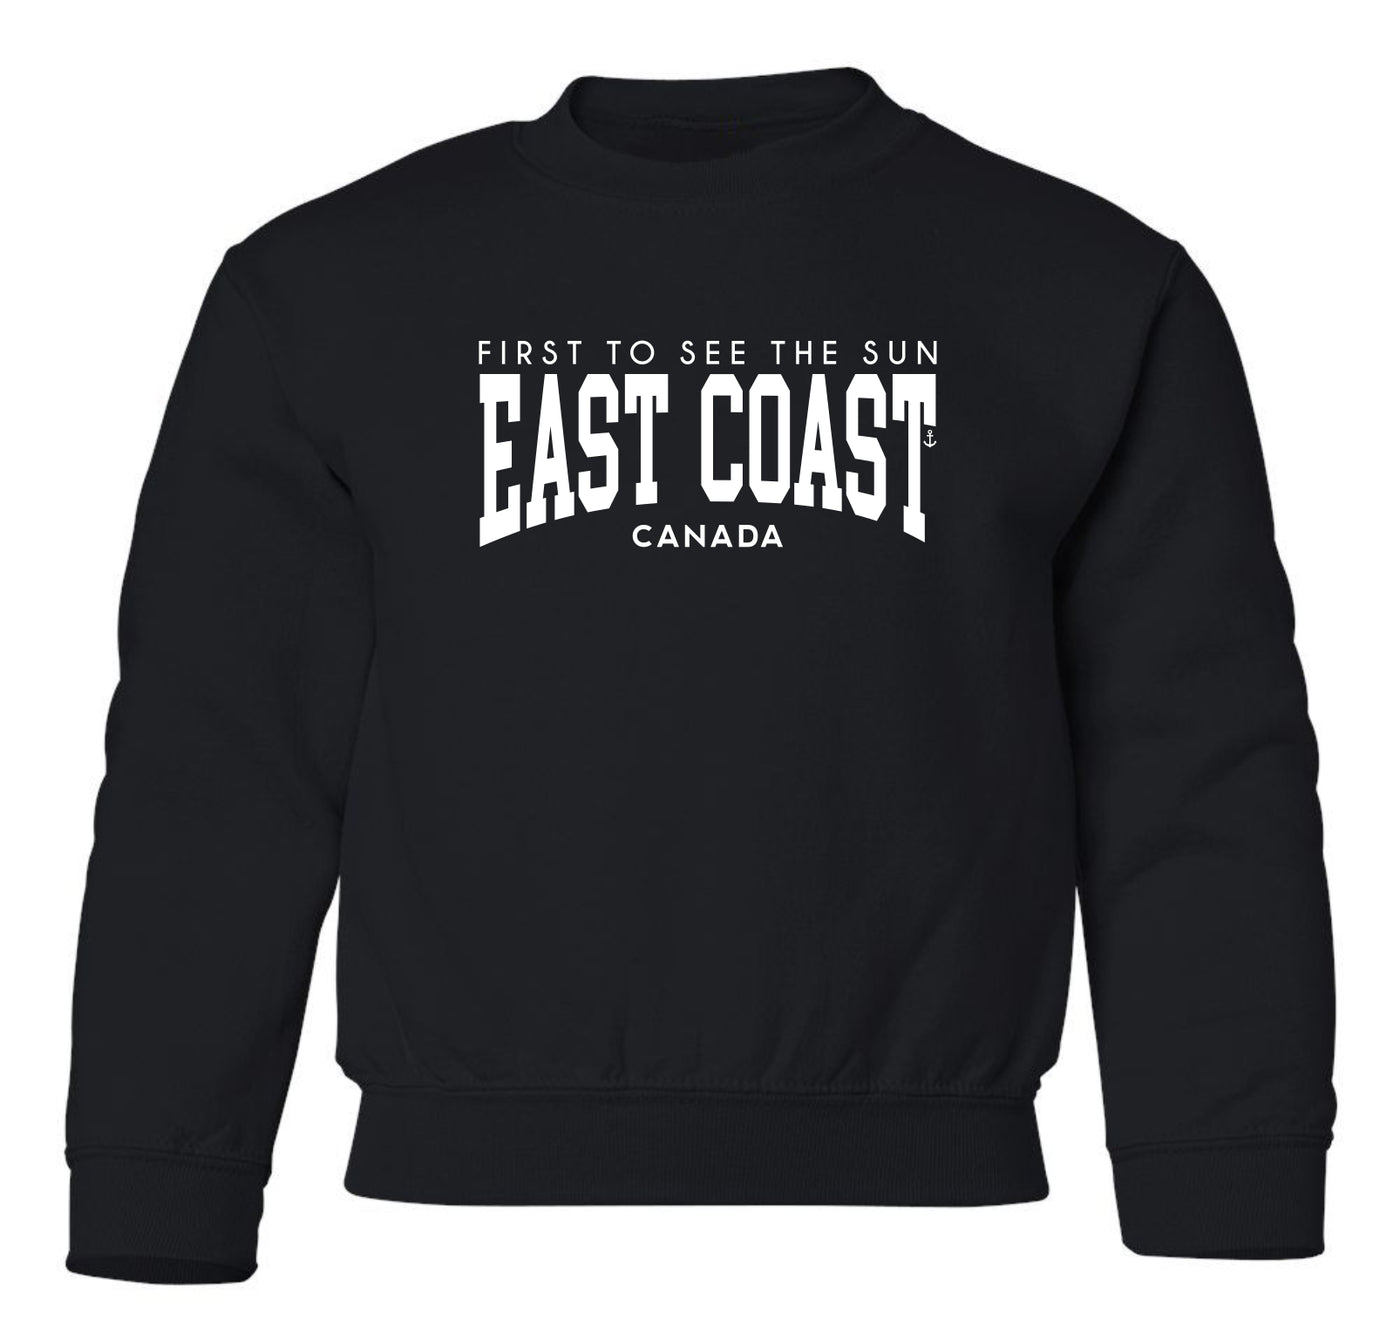 "East Coast - First To See The Sun" Toddler/Youth Crewneck Sweatshirt